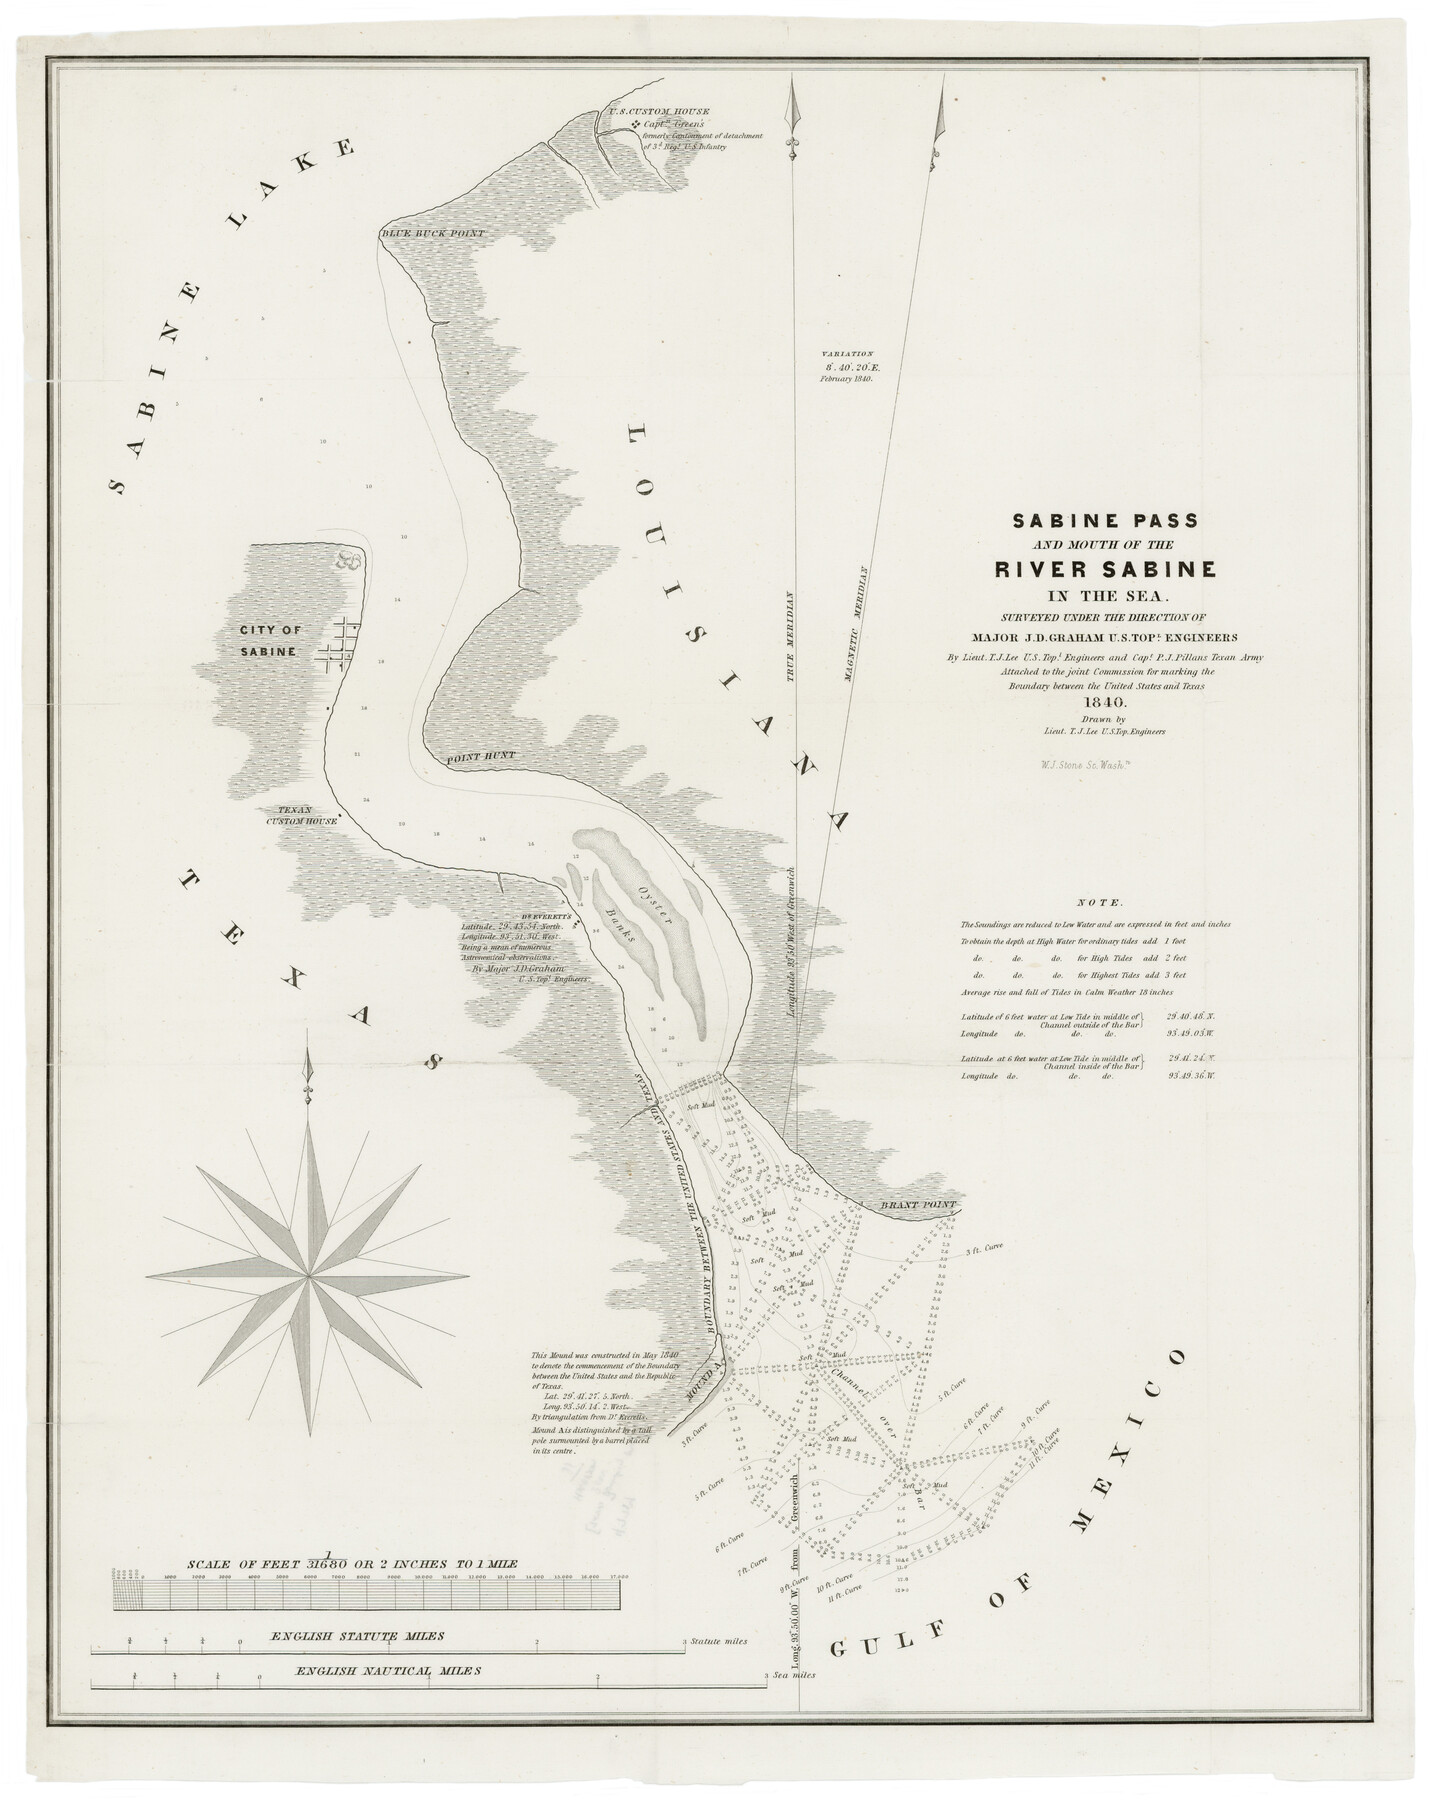 93766, Sabine Pass and mouth of the River Sabine in the sea, Rees-Jones Digital Map Collection